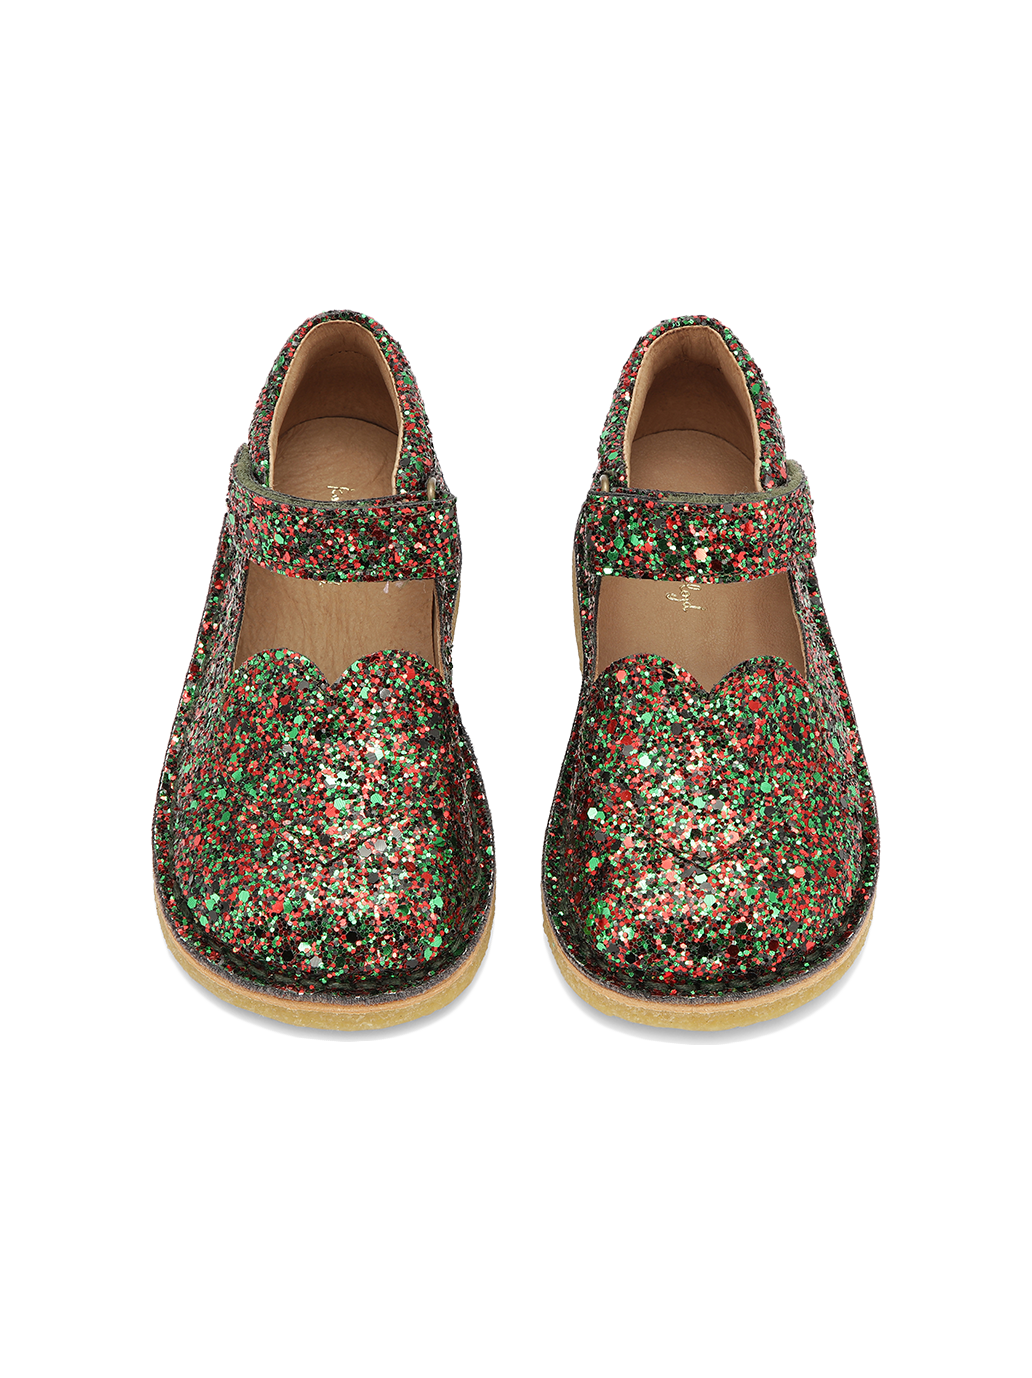 Leather shoes with glitter